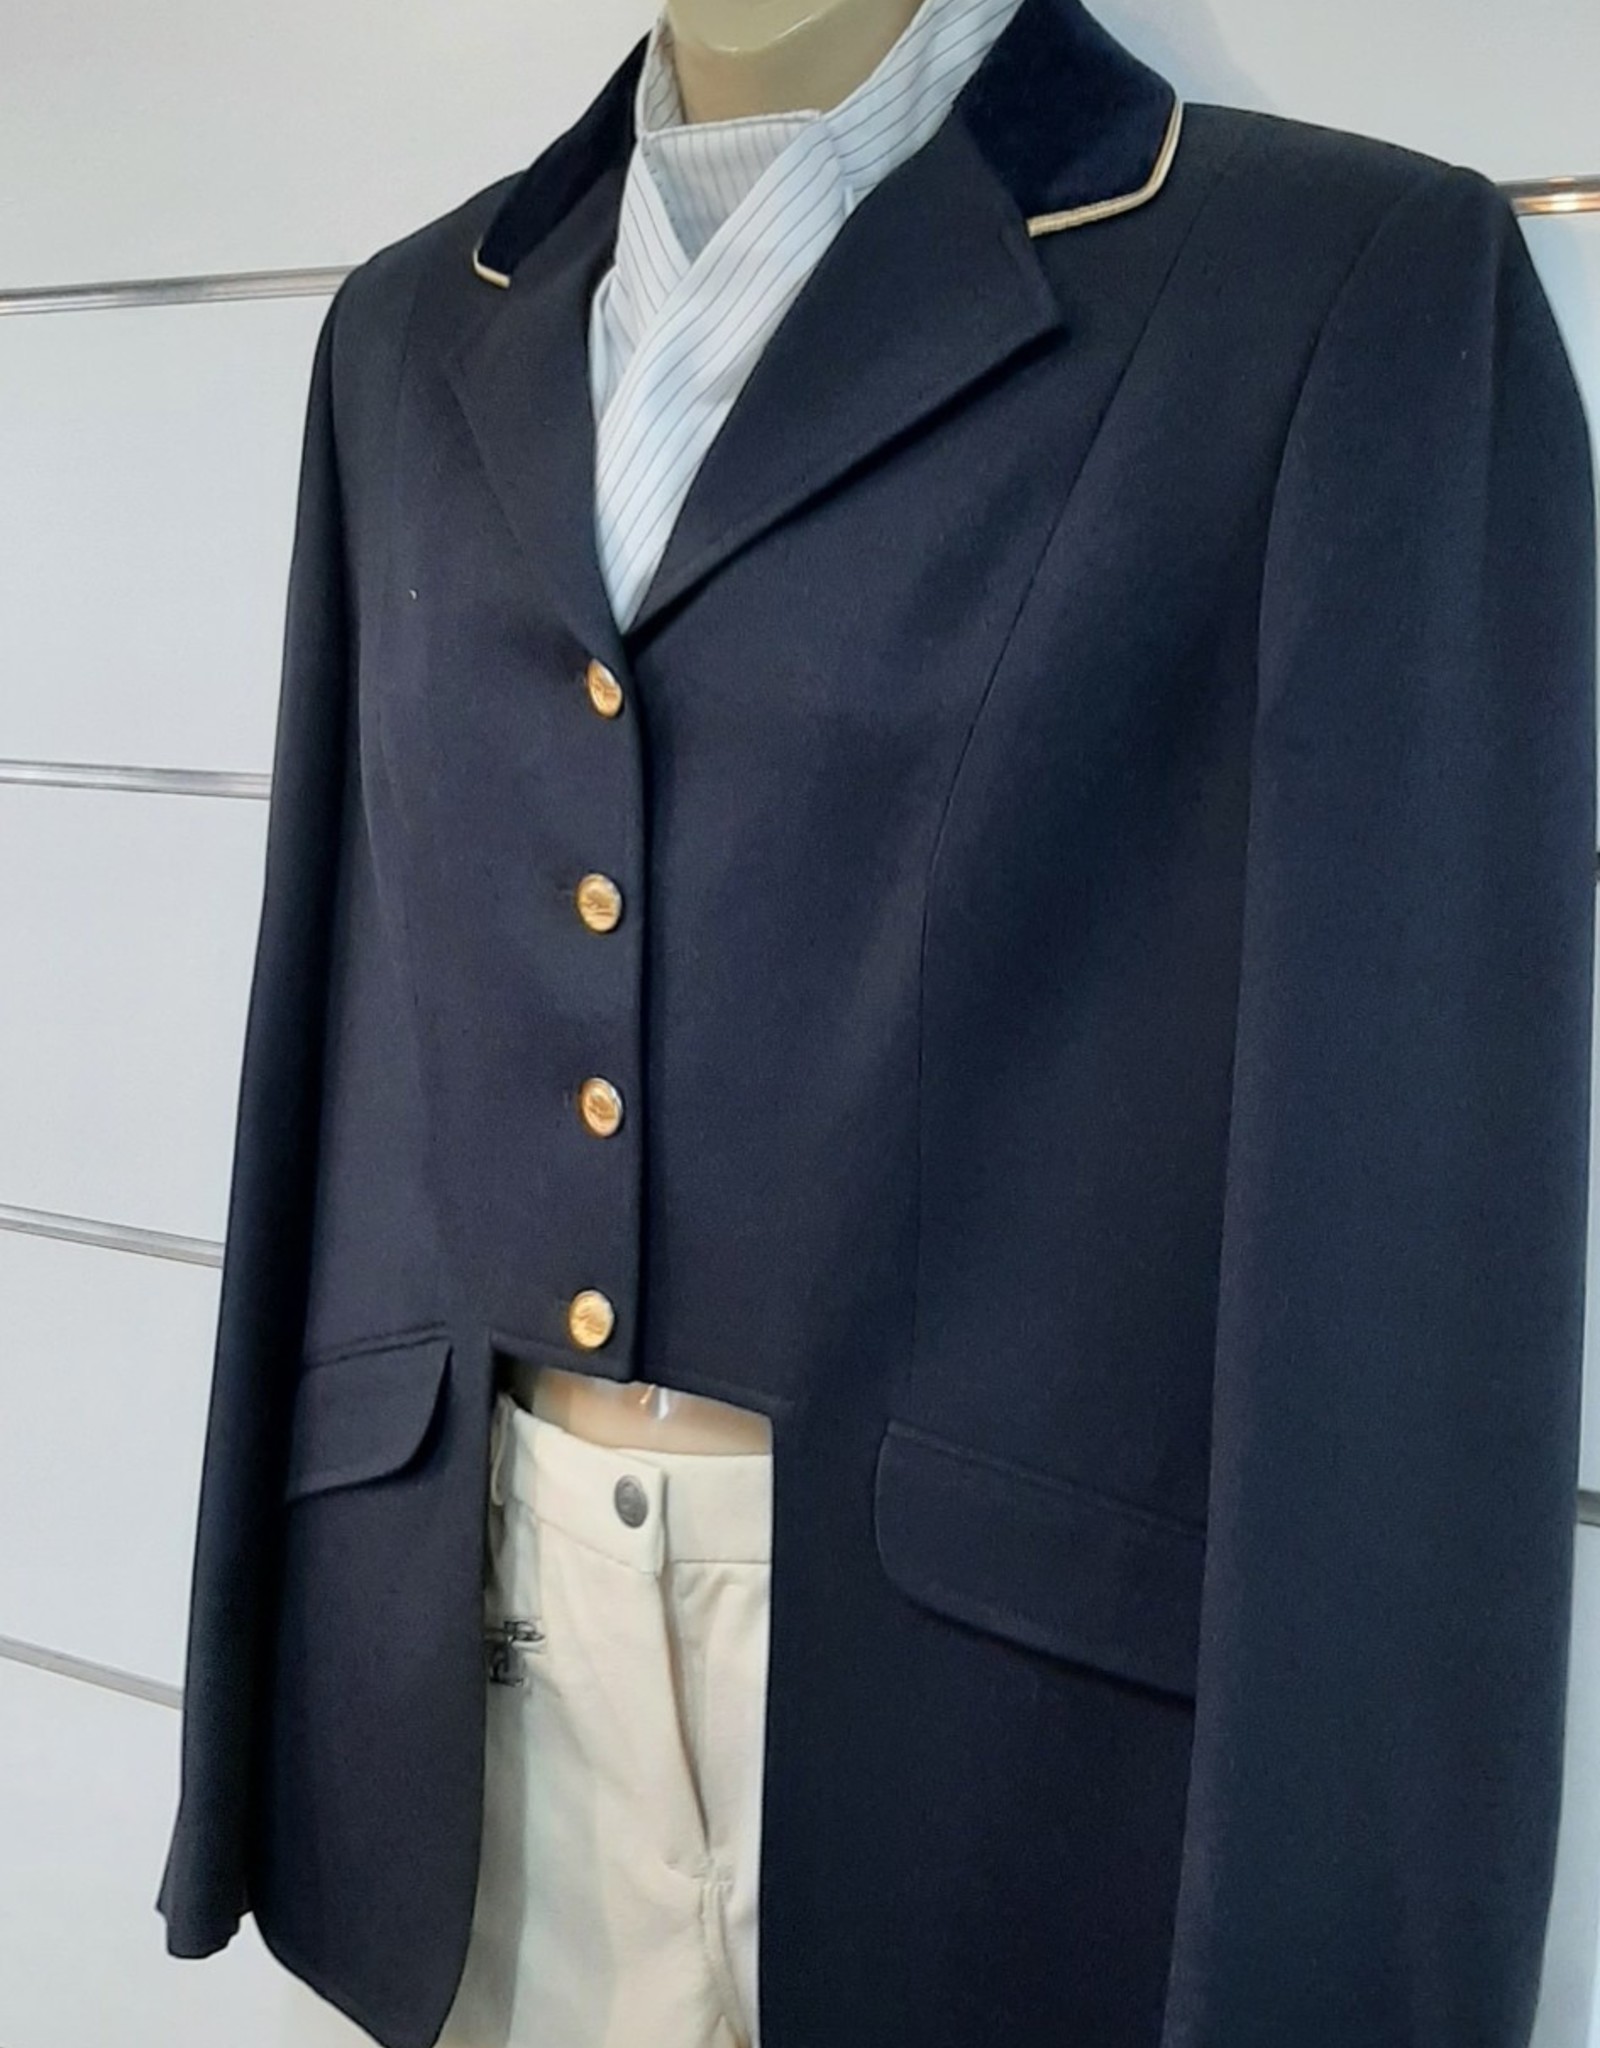 Windsor Apparel Ladies Cutaway Jacket - Navy with Gold Piping  - Size 16